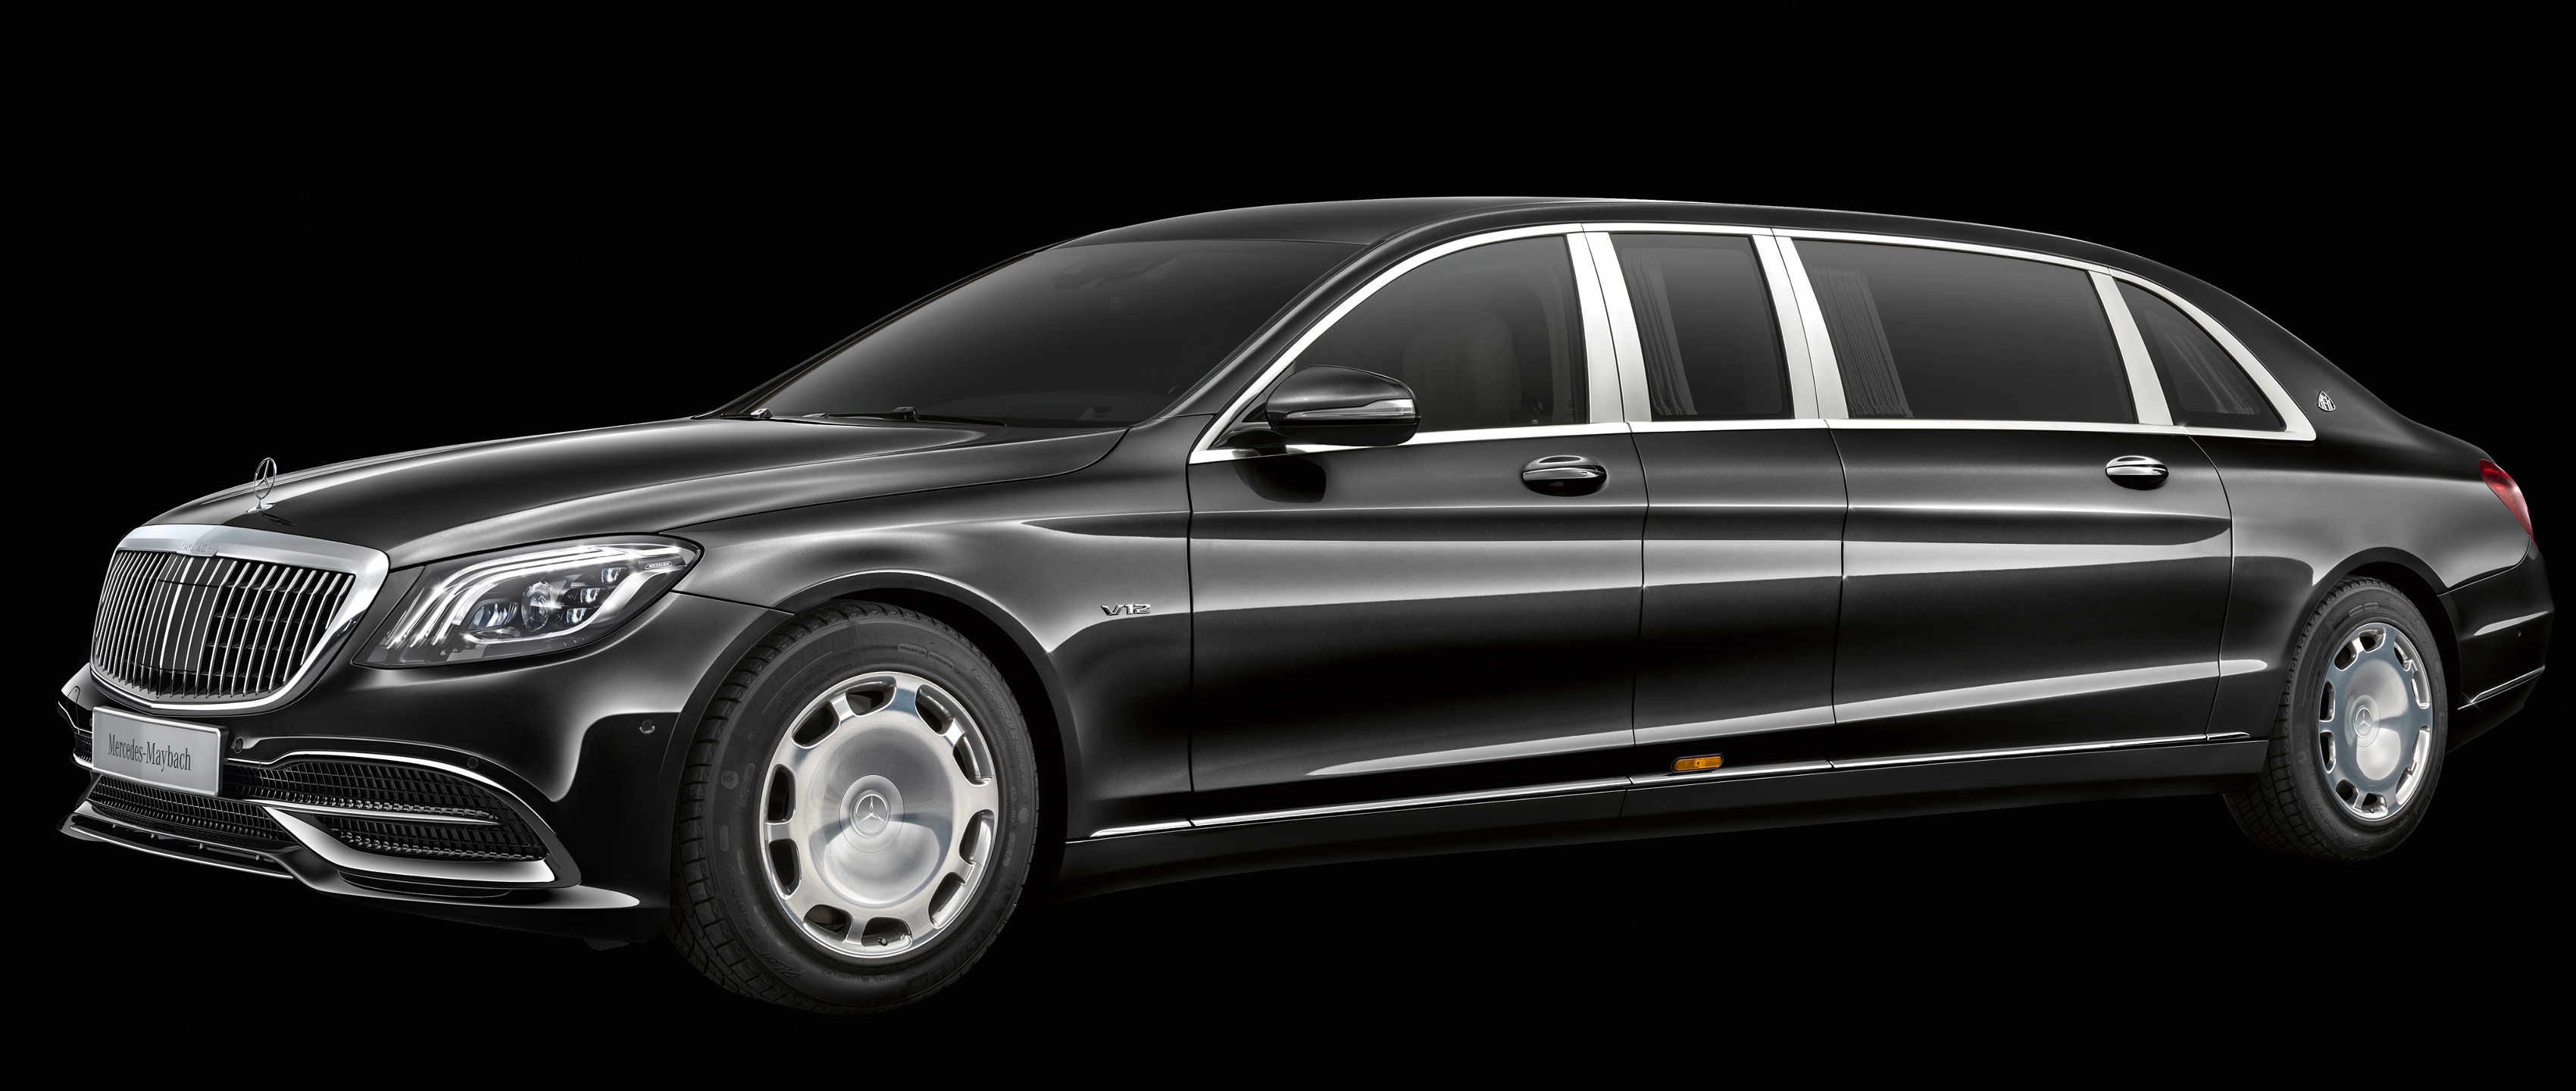 Mercedes-Benz: The new Mercedes-Maybach S 650 Pullman.